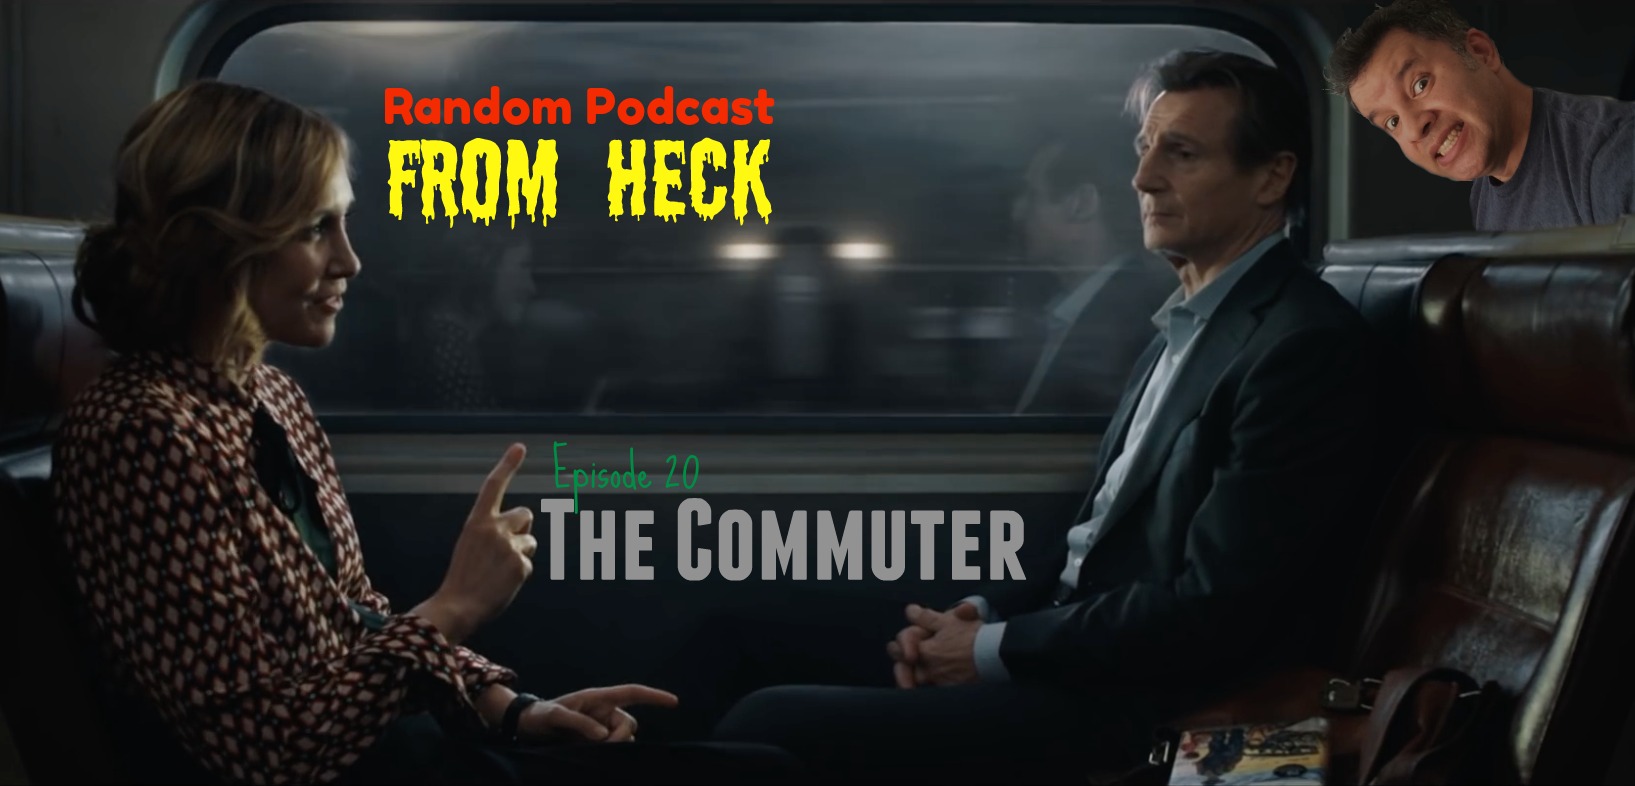 Episode 20: The Commuter, Avengers News, Comics, And More